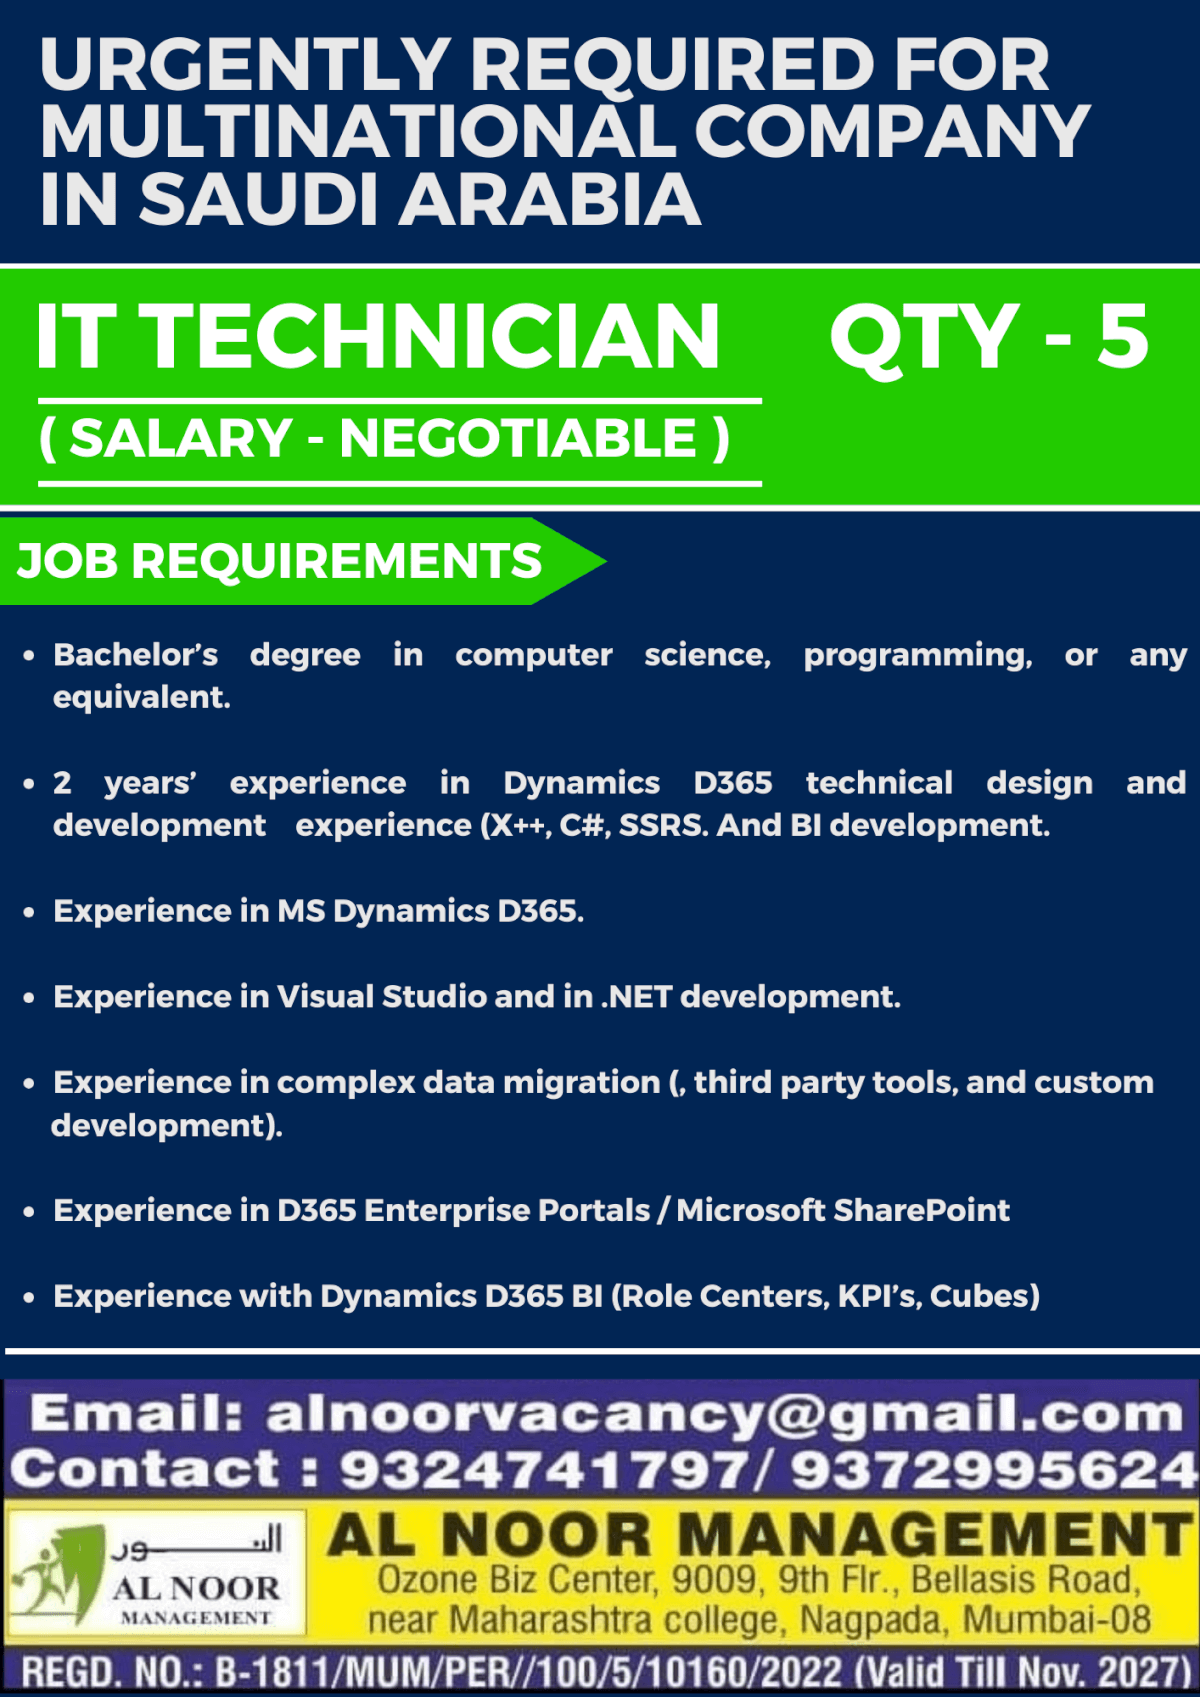 URGENTLY REQUIRED FOR MULTINATIONAL COMPANY IN SAUDI ARABIA